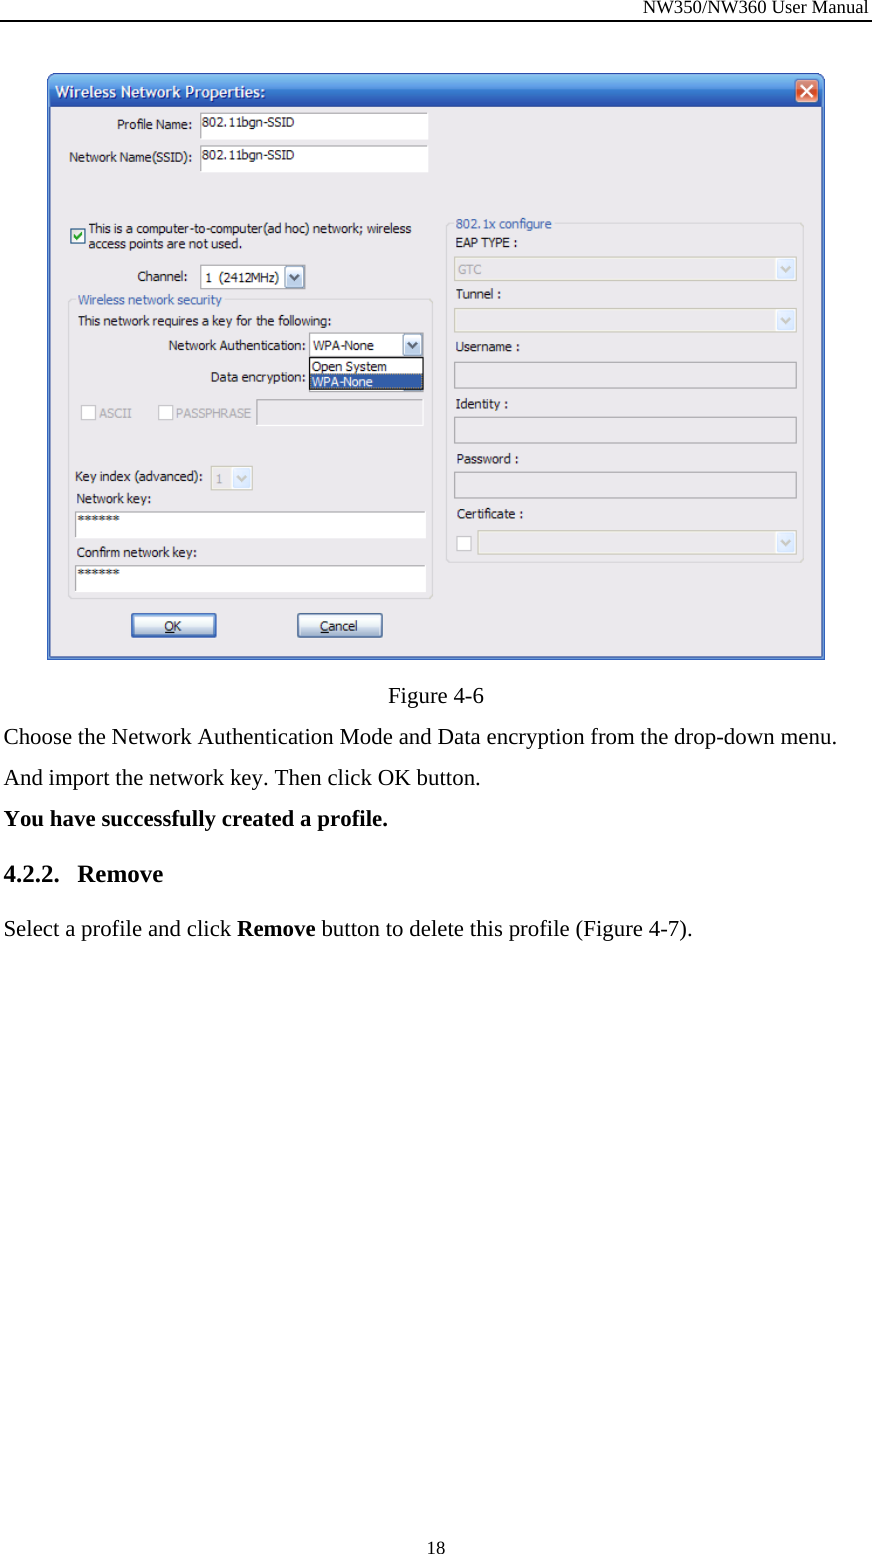 NW350/NW360 User Manual  18 Figure  4-6 Choose the Network Authentication Mode and Data encryption from the drop-down menu. And import the network key. Then click OK button.   You have successfully created a profile. 4.2.2. Remove  Select a profile and click Remove button to delete this profile (Figure  4-7). 